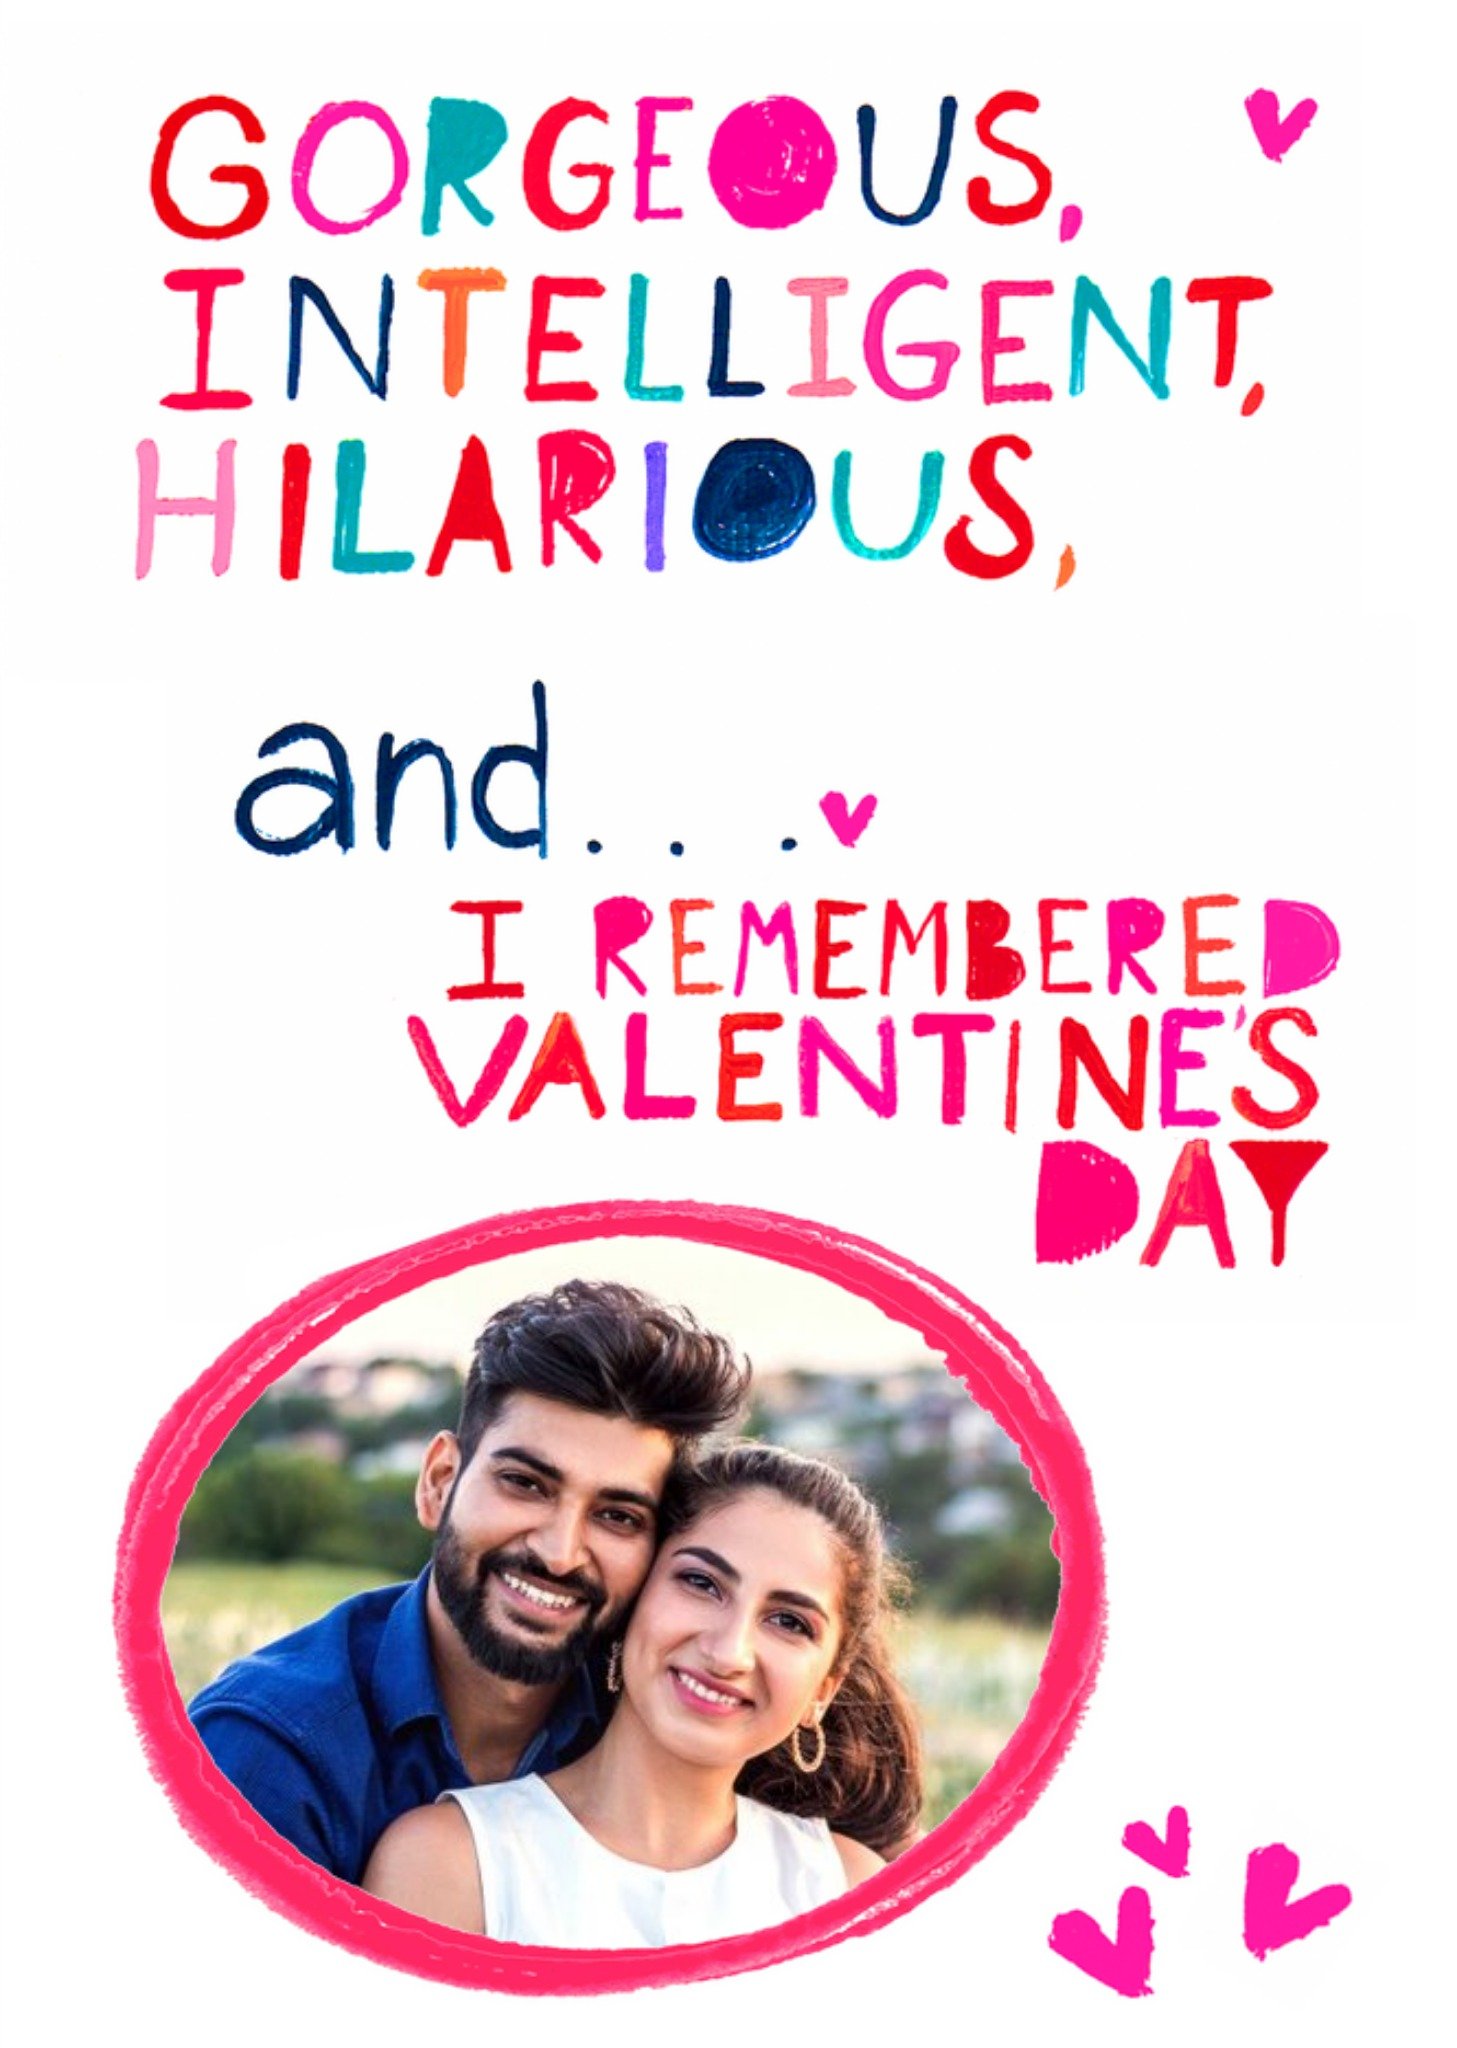 Moonpig Colourful Typography With An Oval Shaped Photo Frame Valentine's Day Photo Upload Card, Larg